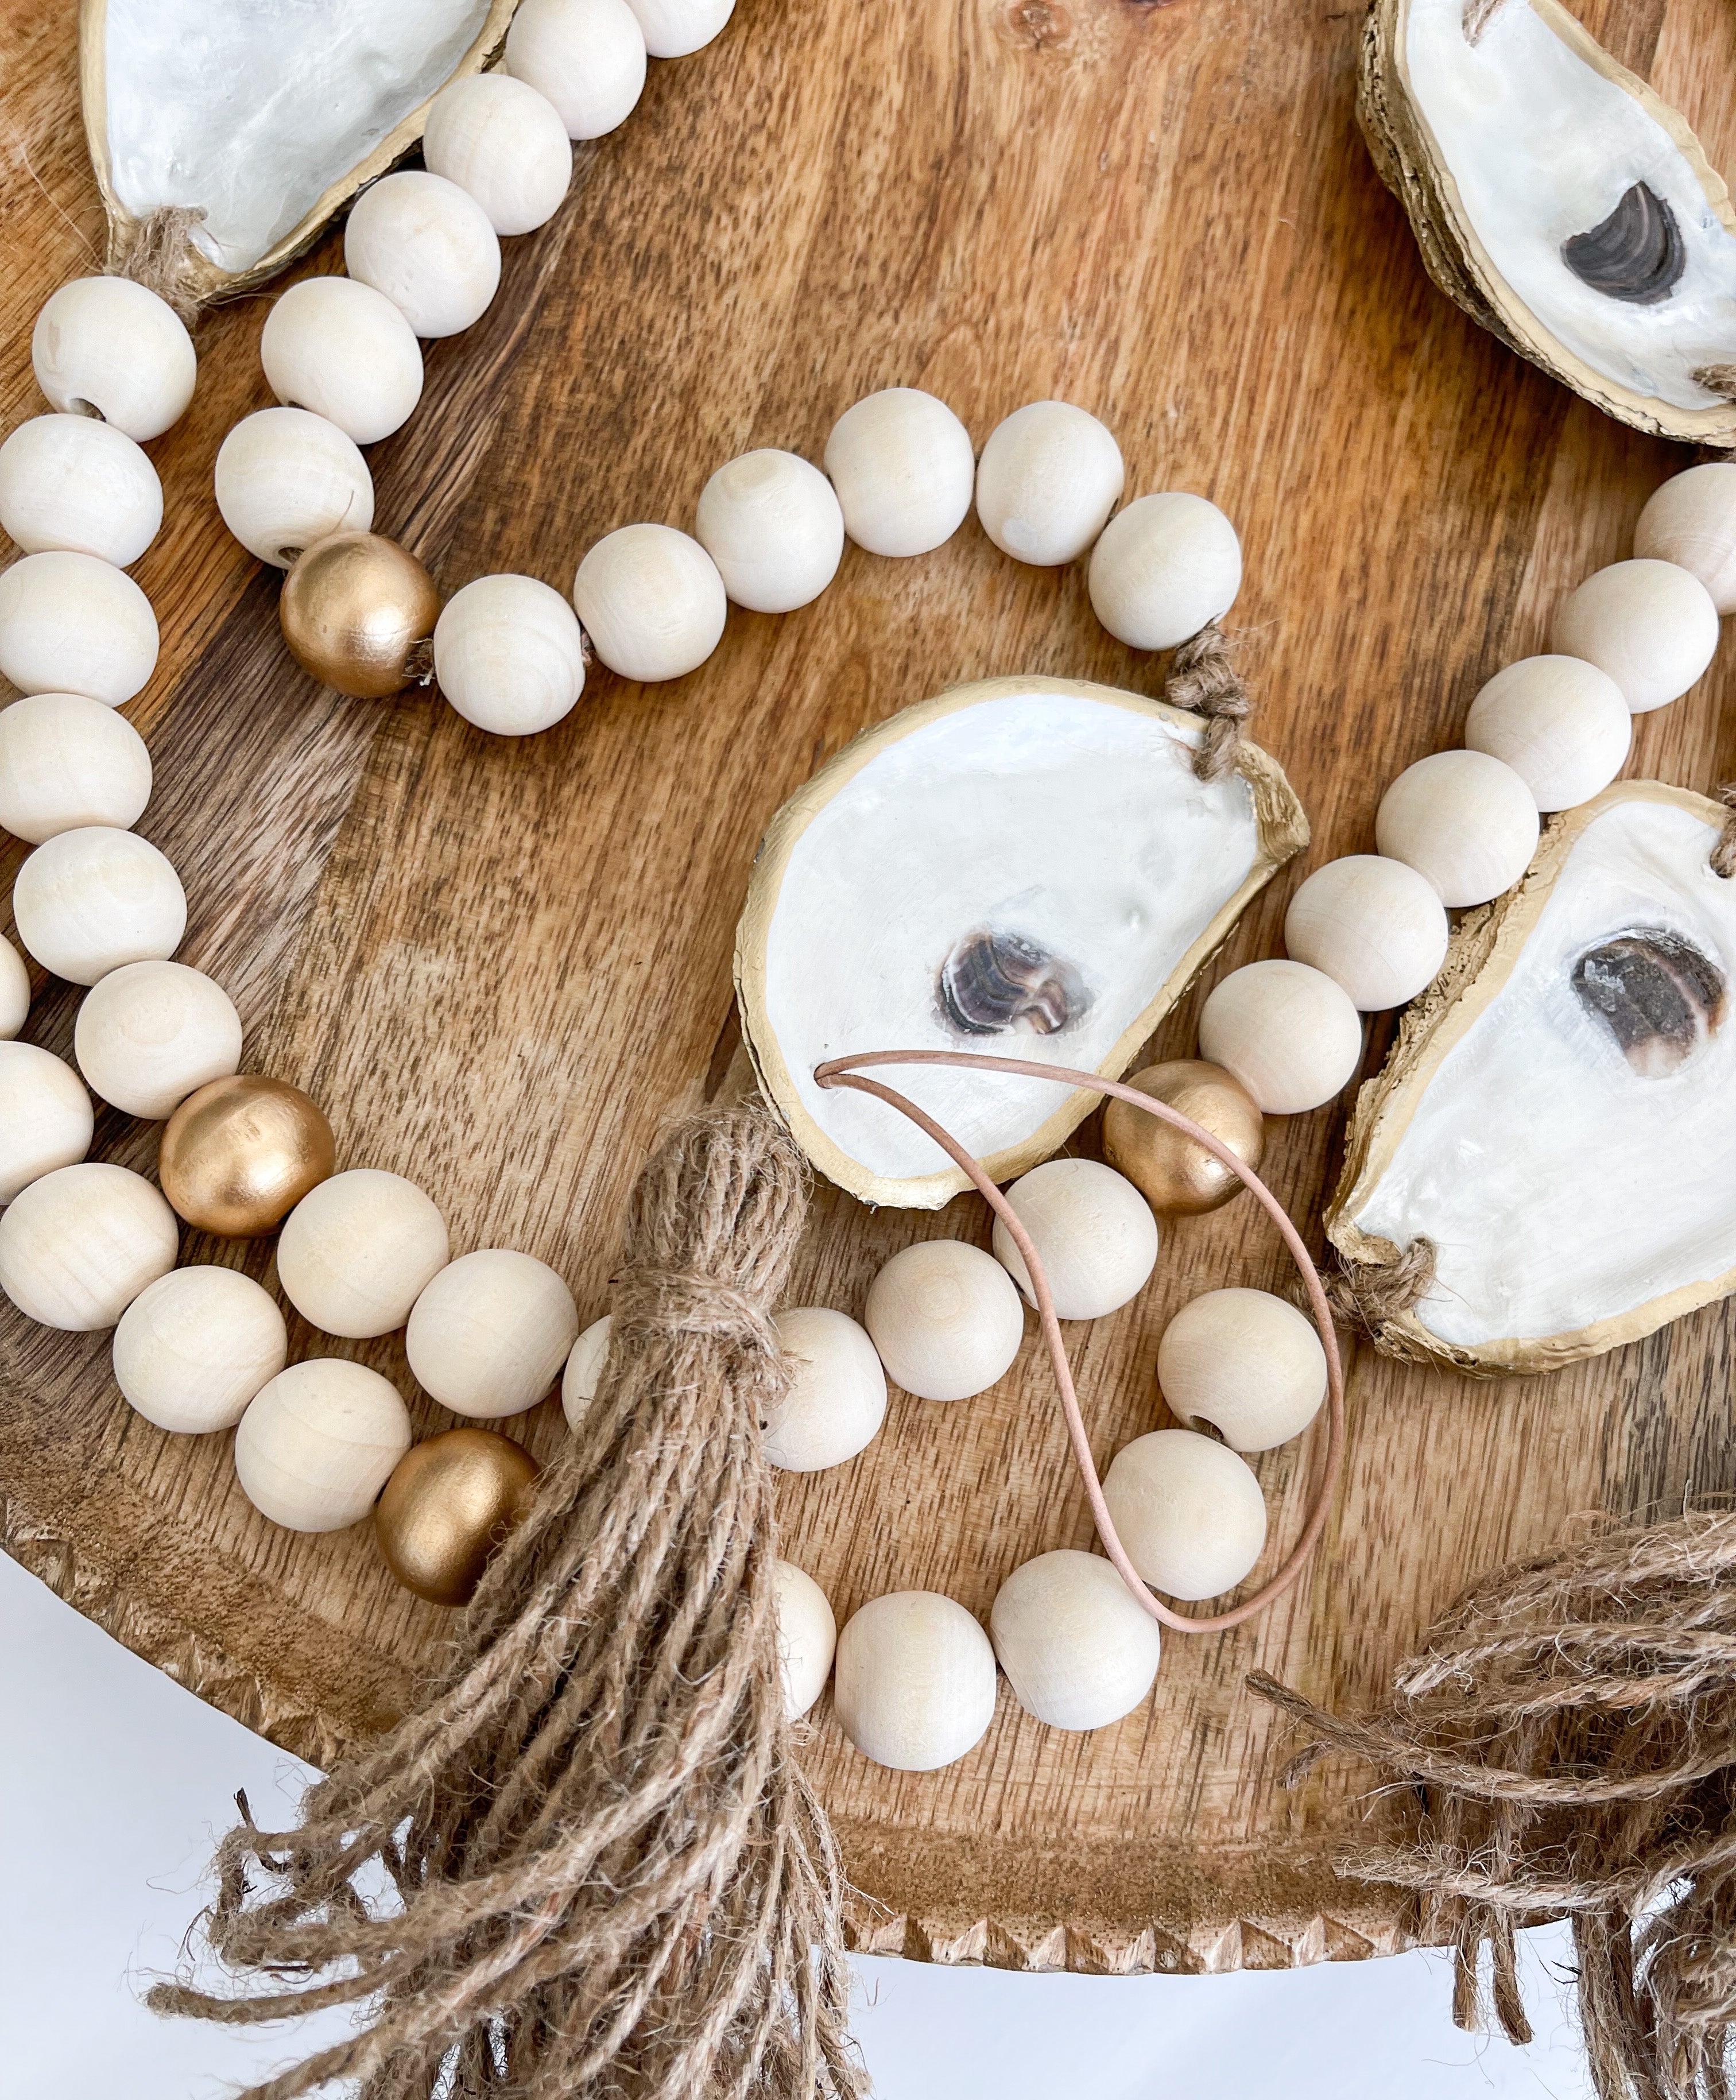 Oyster Shell Wooden Bead Garland with Tassels - Made on Maidstone